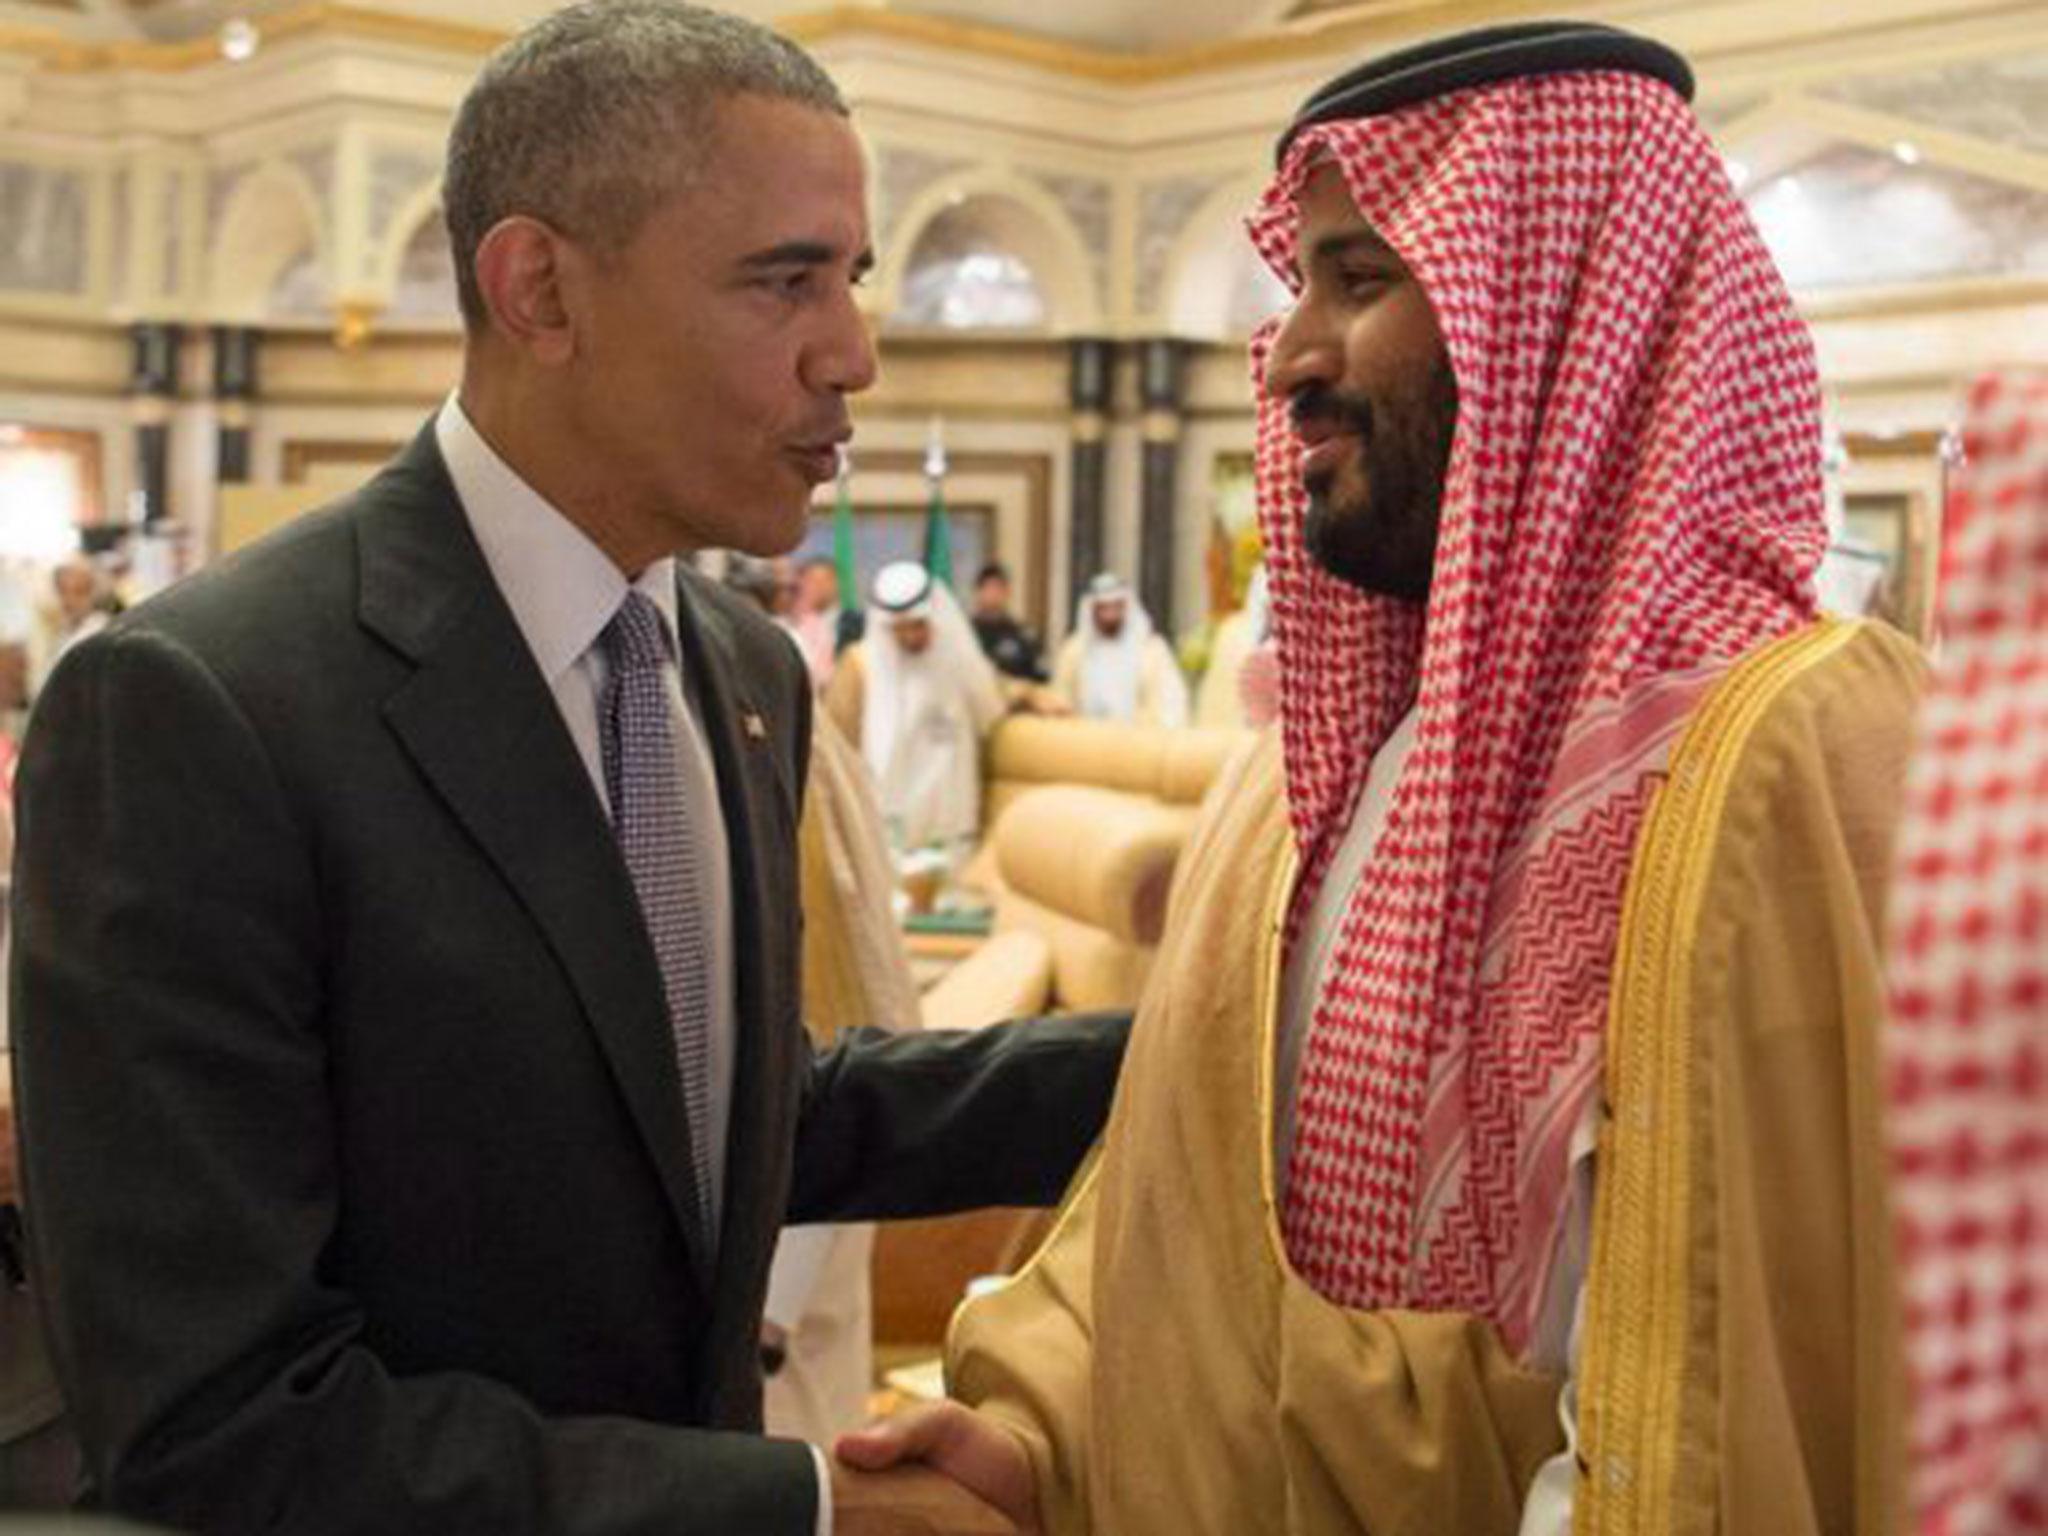 Deputy Crown Prince Mohammad bin Salman, right, welcomes President Obama in Riyadh ahead of a Gulf Cooperation Council summit meeting